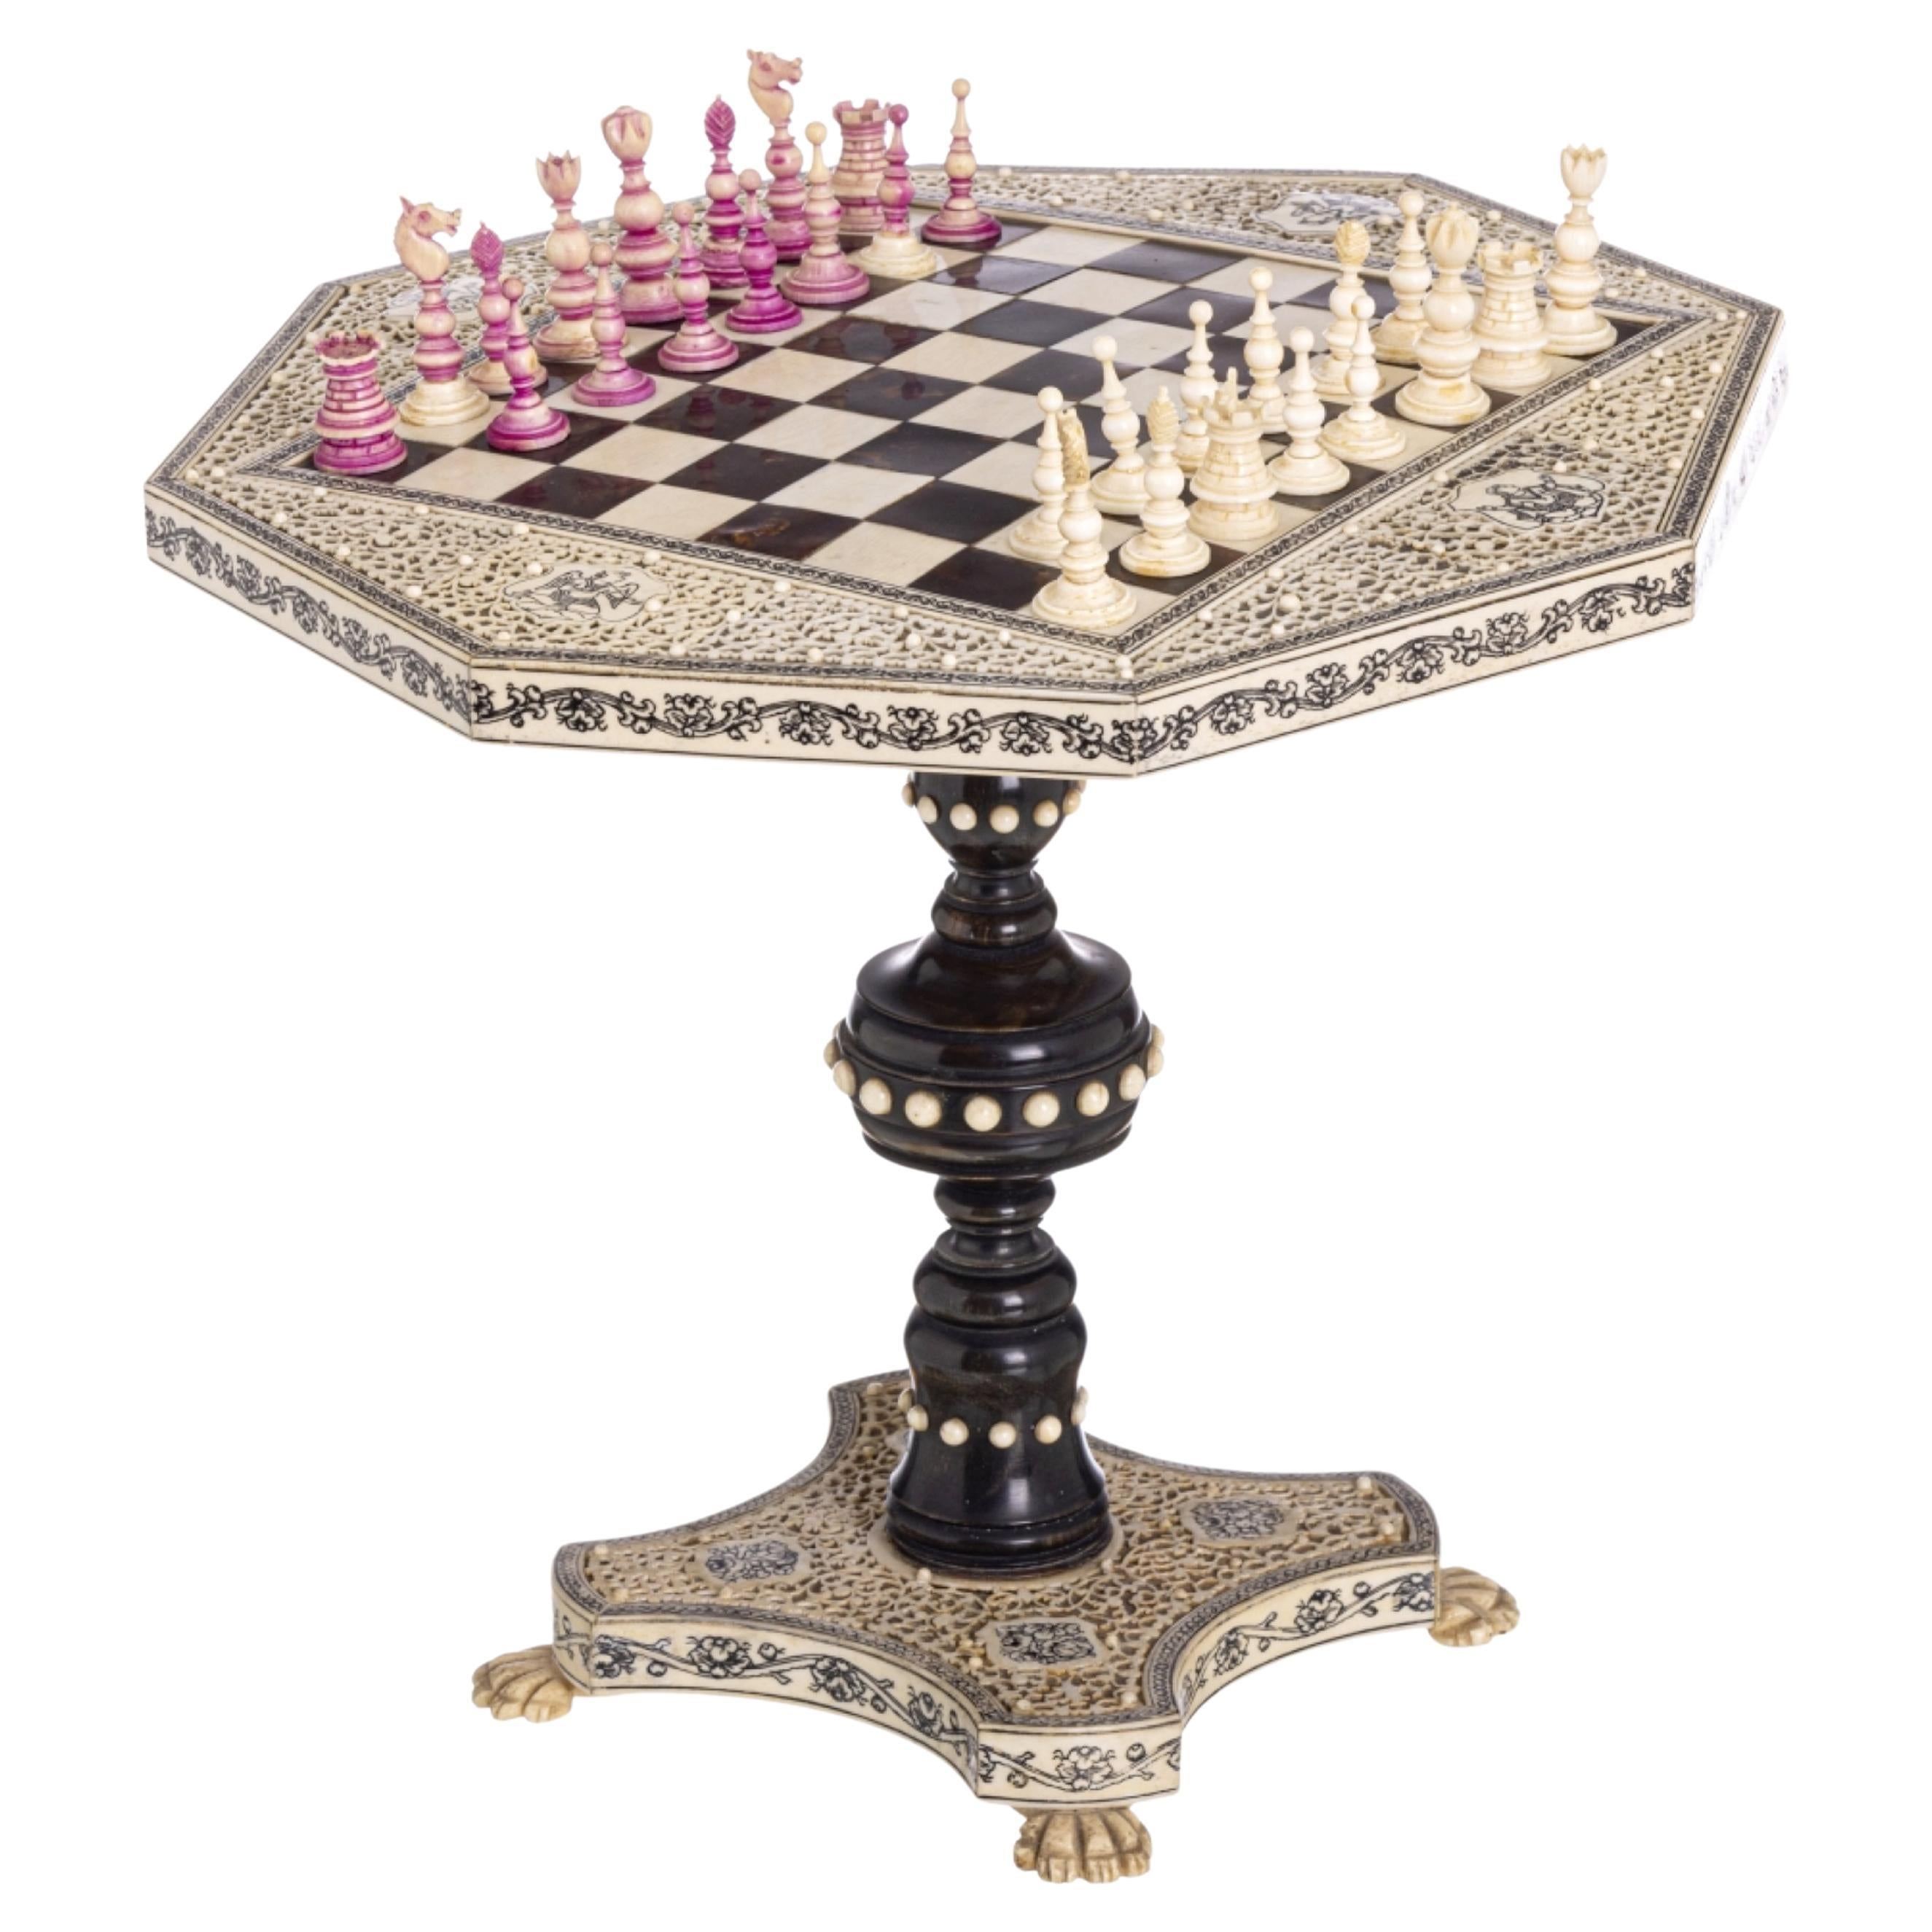 MINIATURE GAME TABLE WITH CHESS PIECES  19th Century Anglo-Indian  For Sale